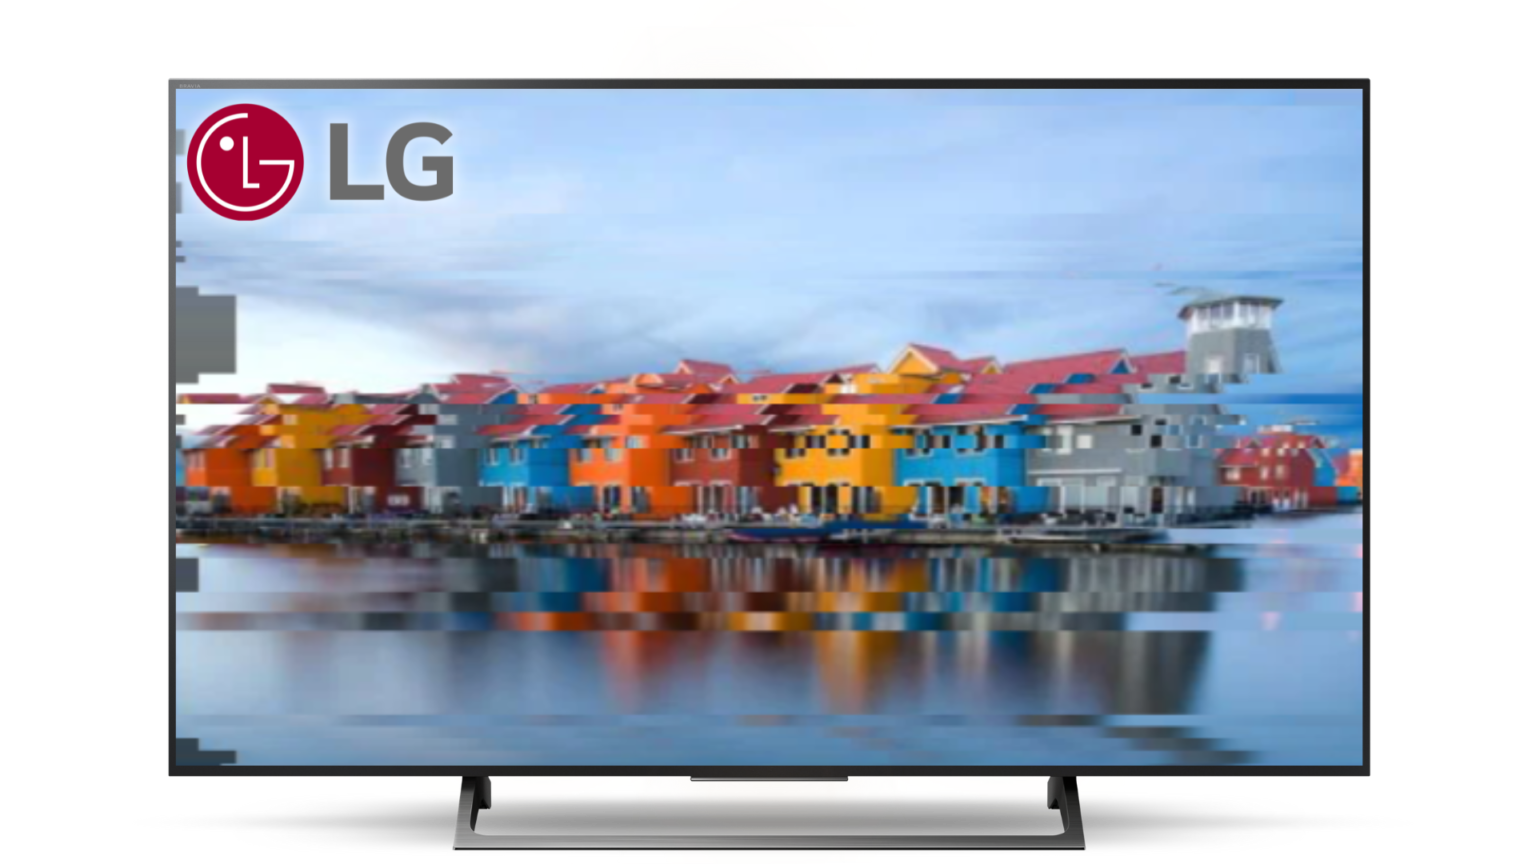 Lg Tv Flickering Screen Featured Image 1536x864 